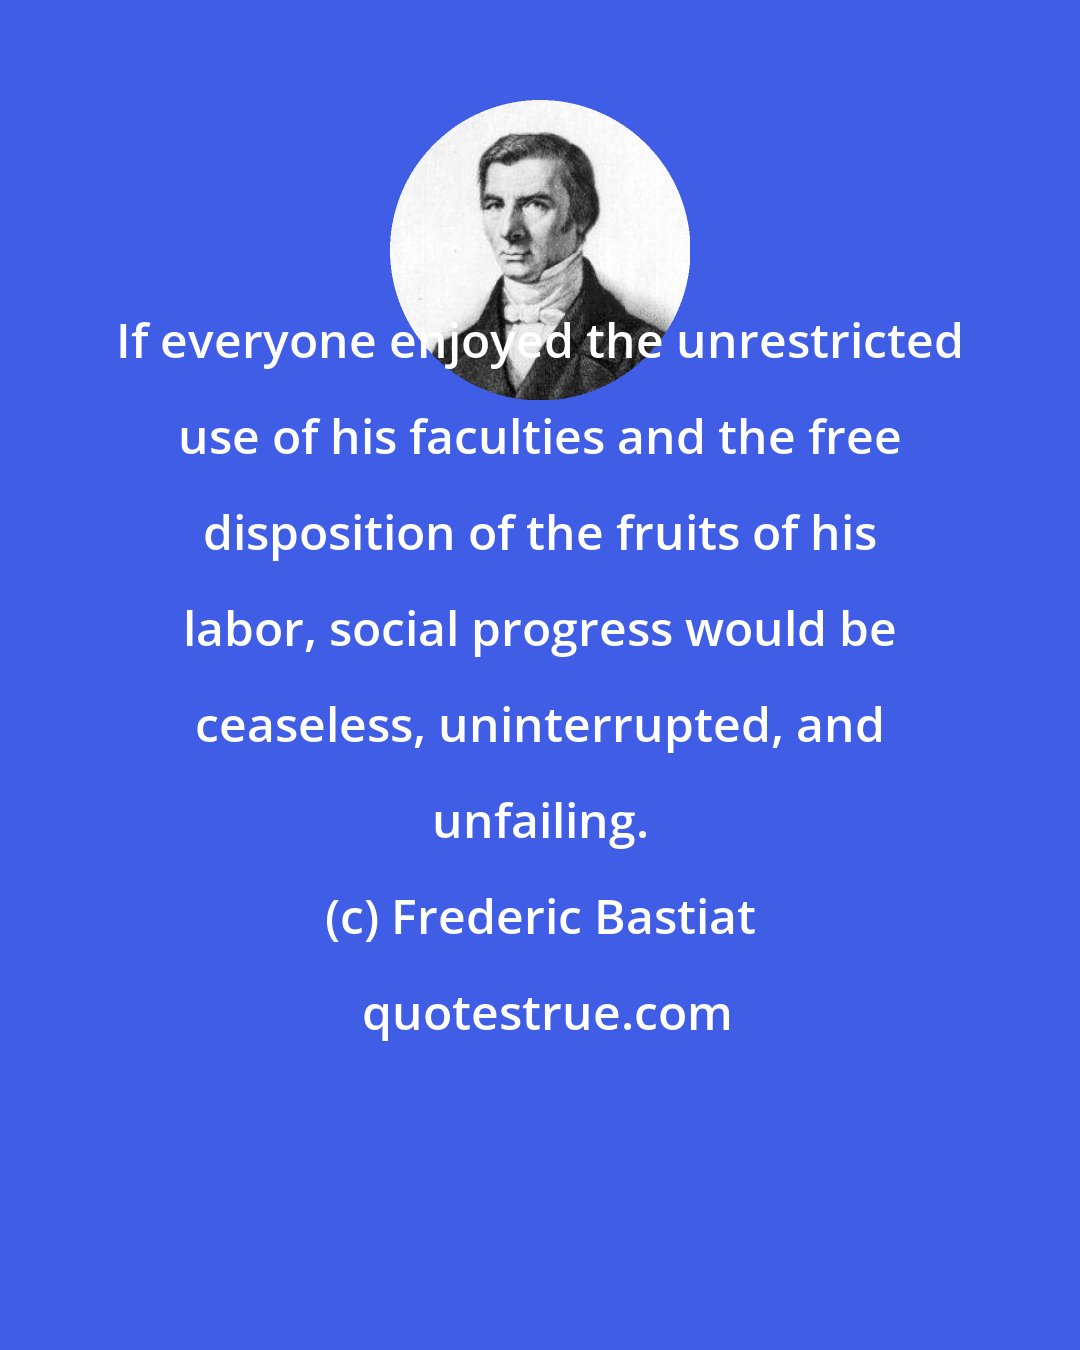 Frederic Bastiat: If everyone enjoyed the unrestricted use of his faculties and the free disposition of the fruits of his labor, social progress would be ceaseless, uninterrupted, and unfailing.